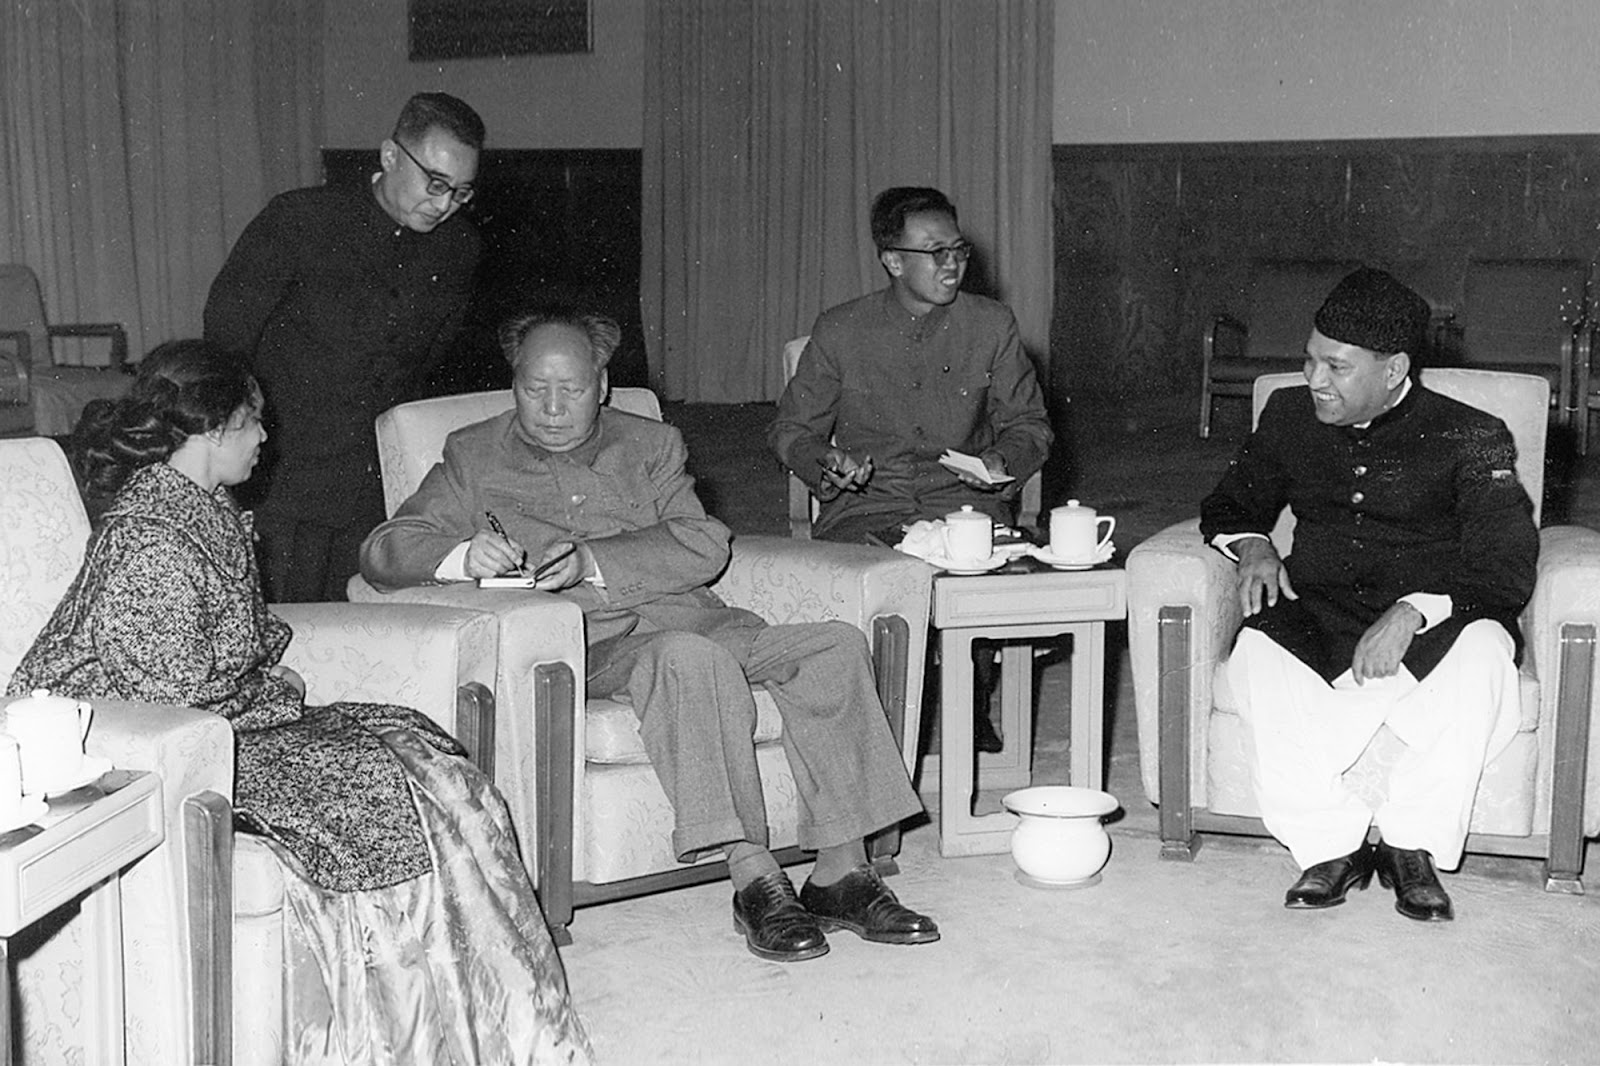 Photograph of Mao signing the book for Sharifuddin’s wife.